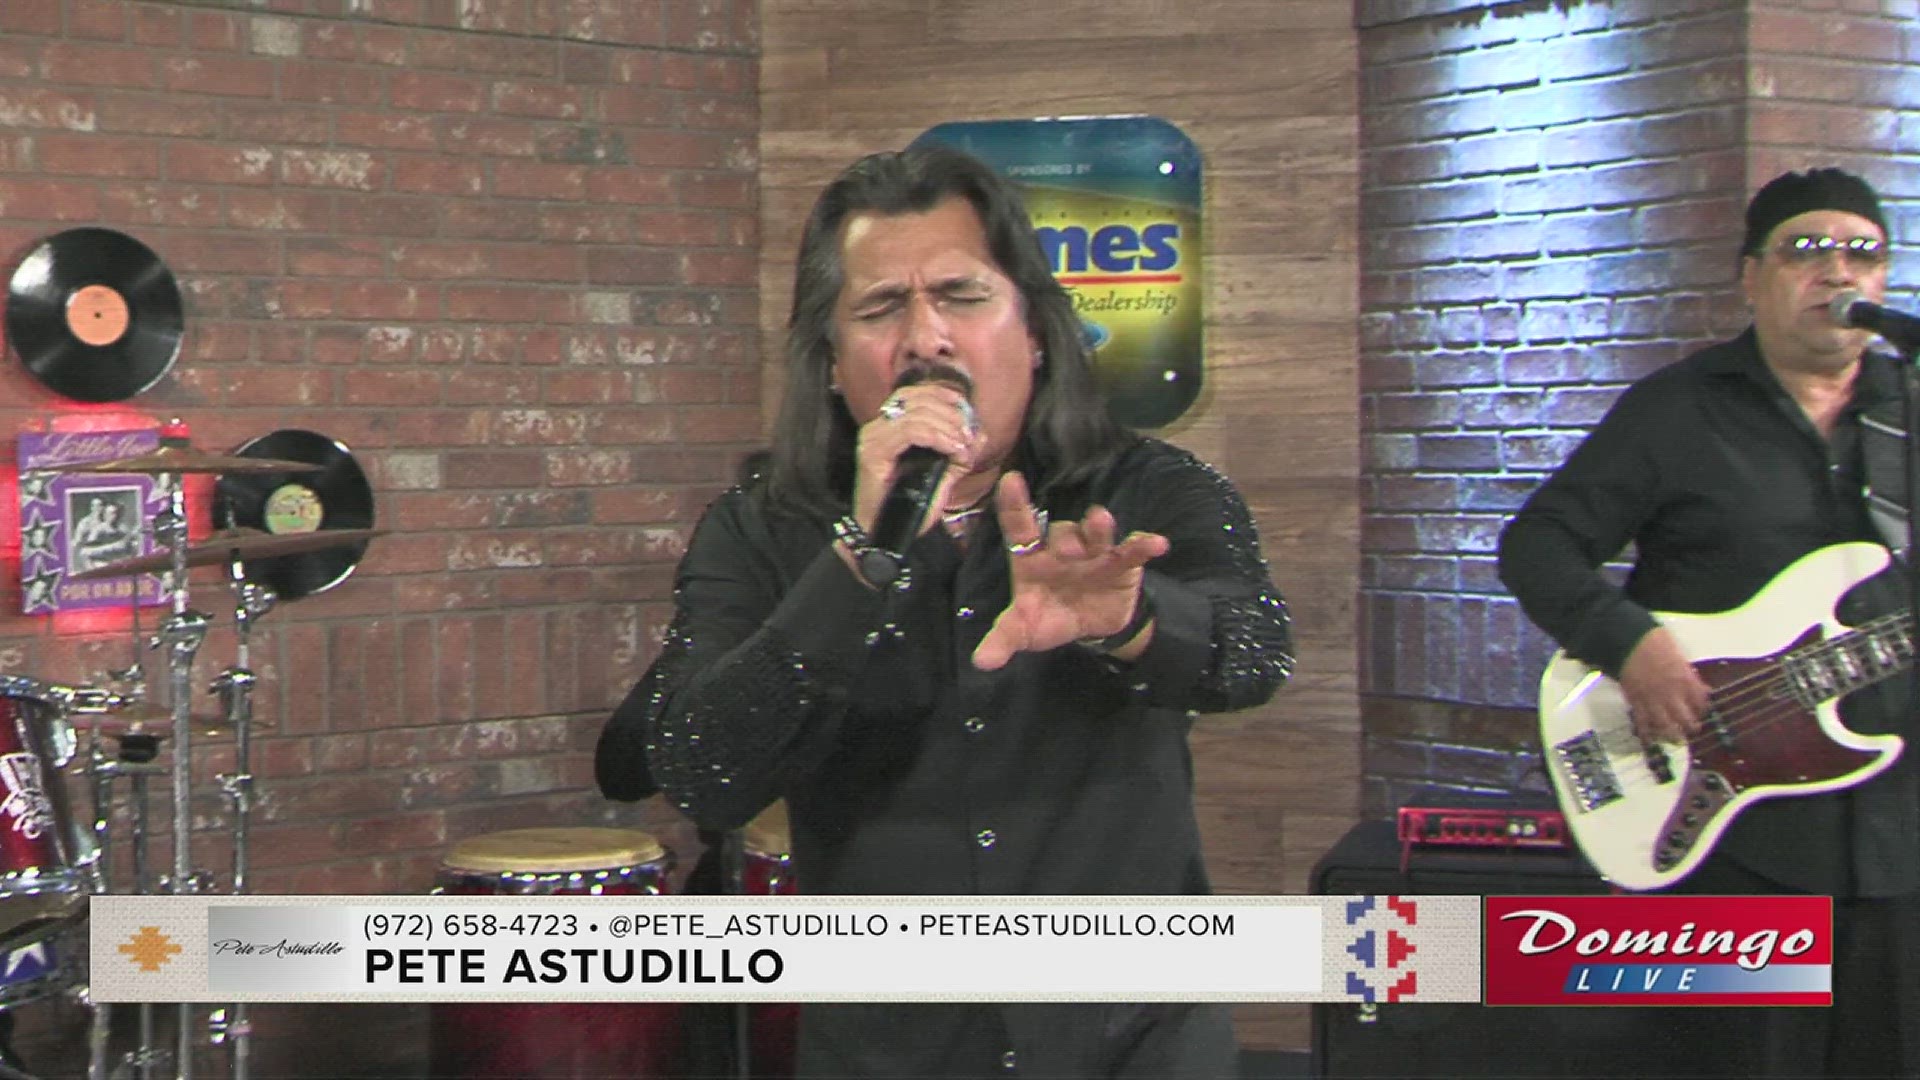 Pete Astudillo and his band joined us on Domingo Live to perform his song "Vas a Llorar."